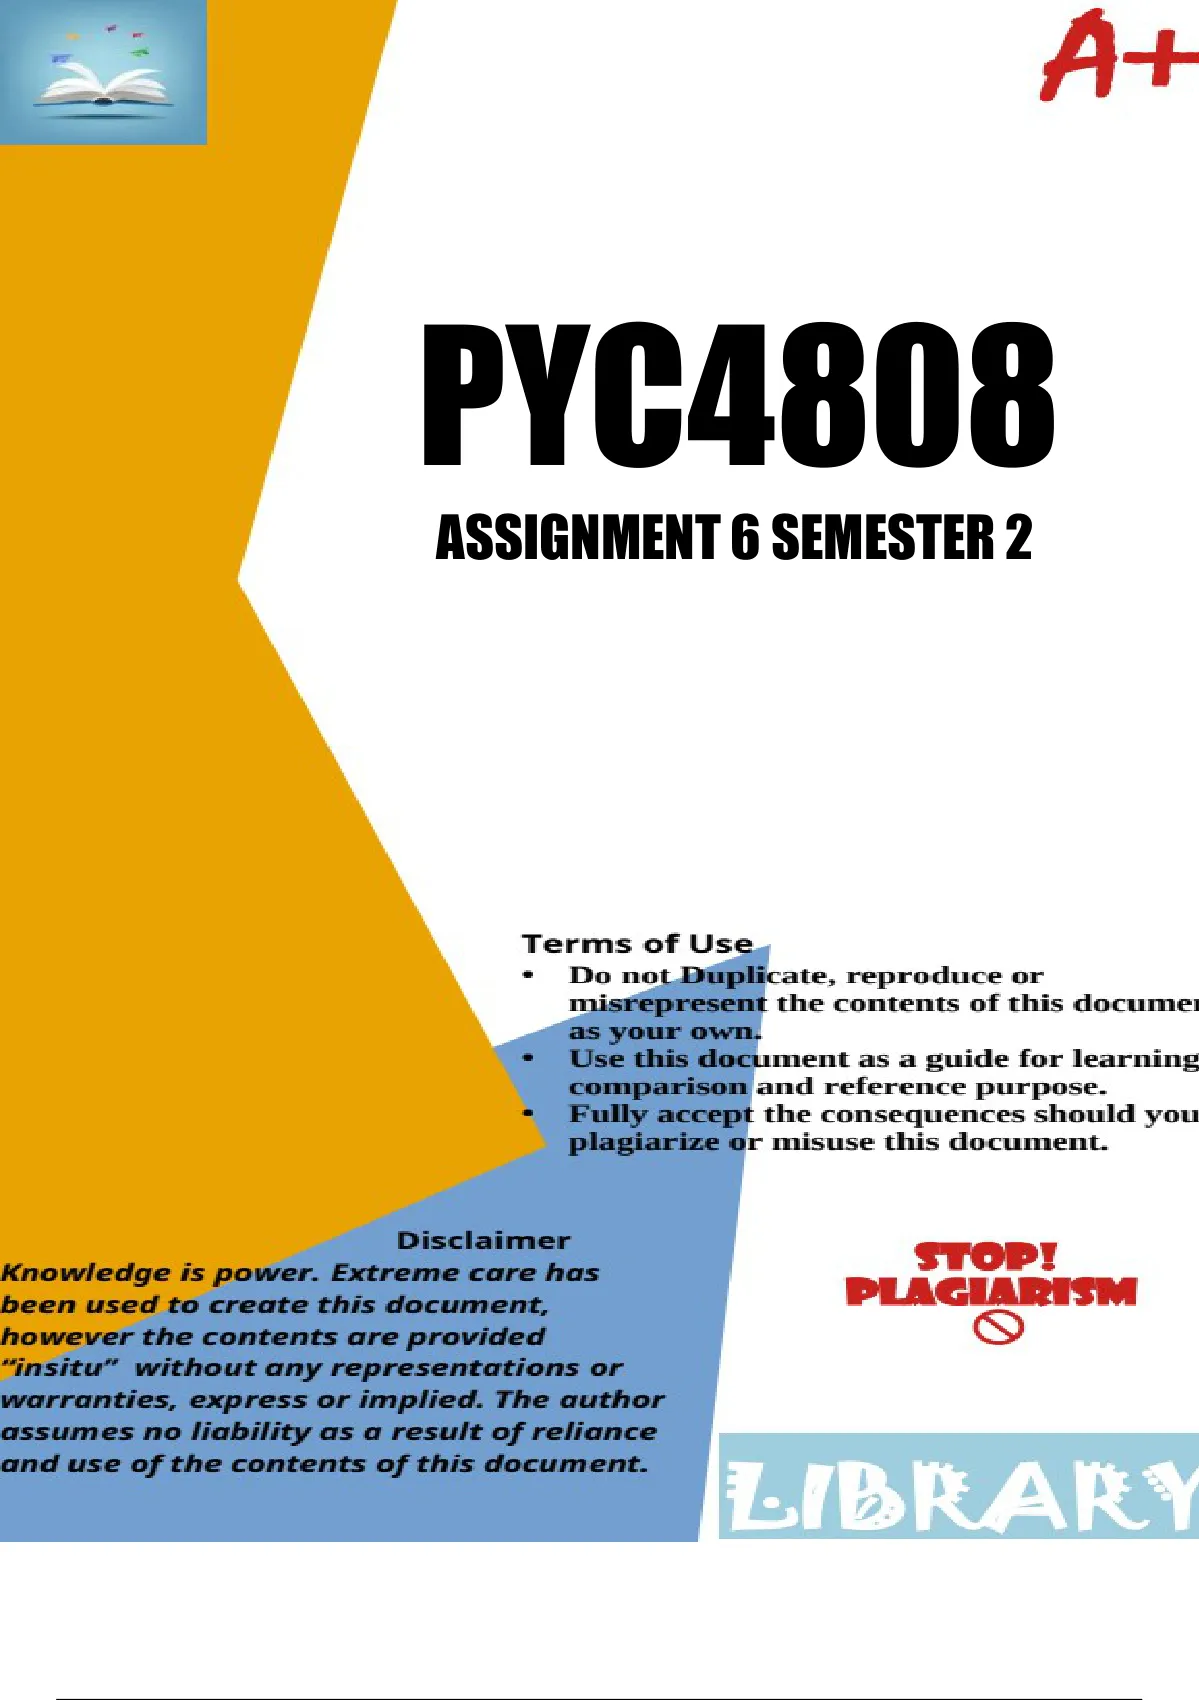 assignment 6 pyc4808